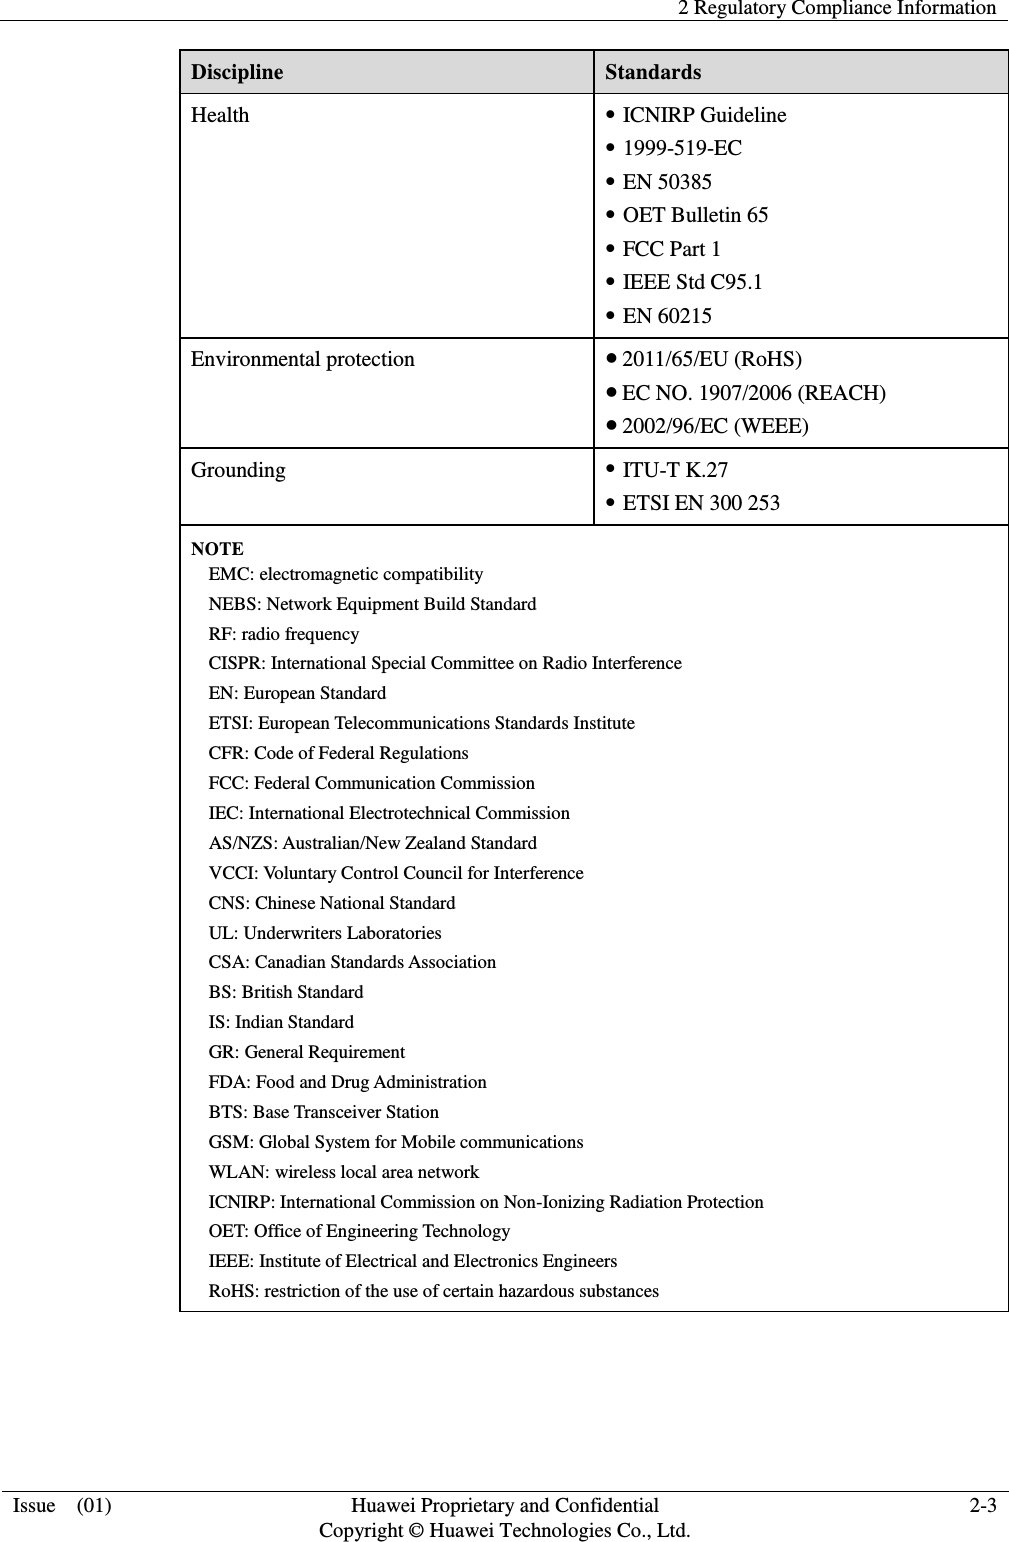   2 Regulatory Compliance Information  Issue    (01) Huawei Proprietary and Confidential                                     Copyright © Huawei Technologies Co., Ltd. 2-3  Discipline Standards Health  ICNIRP Guideline  1999-519-EC  EN 50385  OET Bulletin 65  FCC Part 1  IEEE Std C95.1  EN 60215 Environmental protection  2011/65/EU (RoHS)  EC NO. 1907/2006 (REACH)  2002/96/EC (WEEE) Grounding  ITU-T K.27  ETSI EN 300 253 NOTE EMC: electromagnetic compatibility NEBS: Network Equipment Build Standard RF: radio frequency CISPR: International Special Committee on Radio Interference EN: European Standard ETSI: European Telecommunications Standards Institute CFR: Code of Federal Regulations FCC: Federal Communication Commission IEC: International Electrotechnical Commission AS/NZS: Australian/New Zealand Standard VCCI: Voluntary Control Council for Interference CNS: Chinese National Standard UL: Underwriters Laboratories CSA: Canadian Standards Association BS: British Standard IS: Indian Standard GR: General Requirement FDA: Food and Drug Administration BTS: Base Transceiver Station GSM: Global System for Mobile communications WLAN: wireless local area network ICNIRP: International Commission on Non-Ionizing Radiation Protection OET: Office of Engineering Technology IEEE: Institute of Electrical and Electronics Engineers RoHS: restriction of the use of certain hazardous substances  